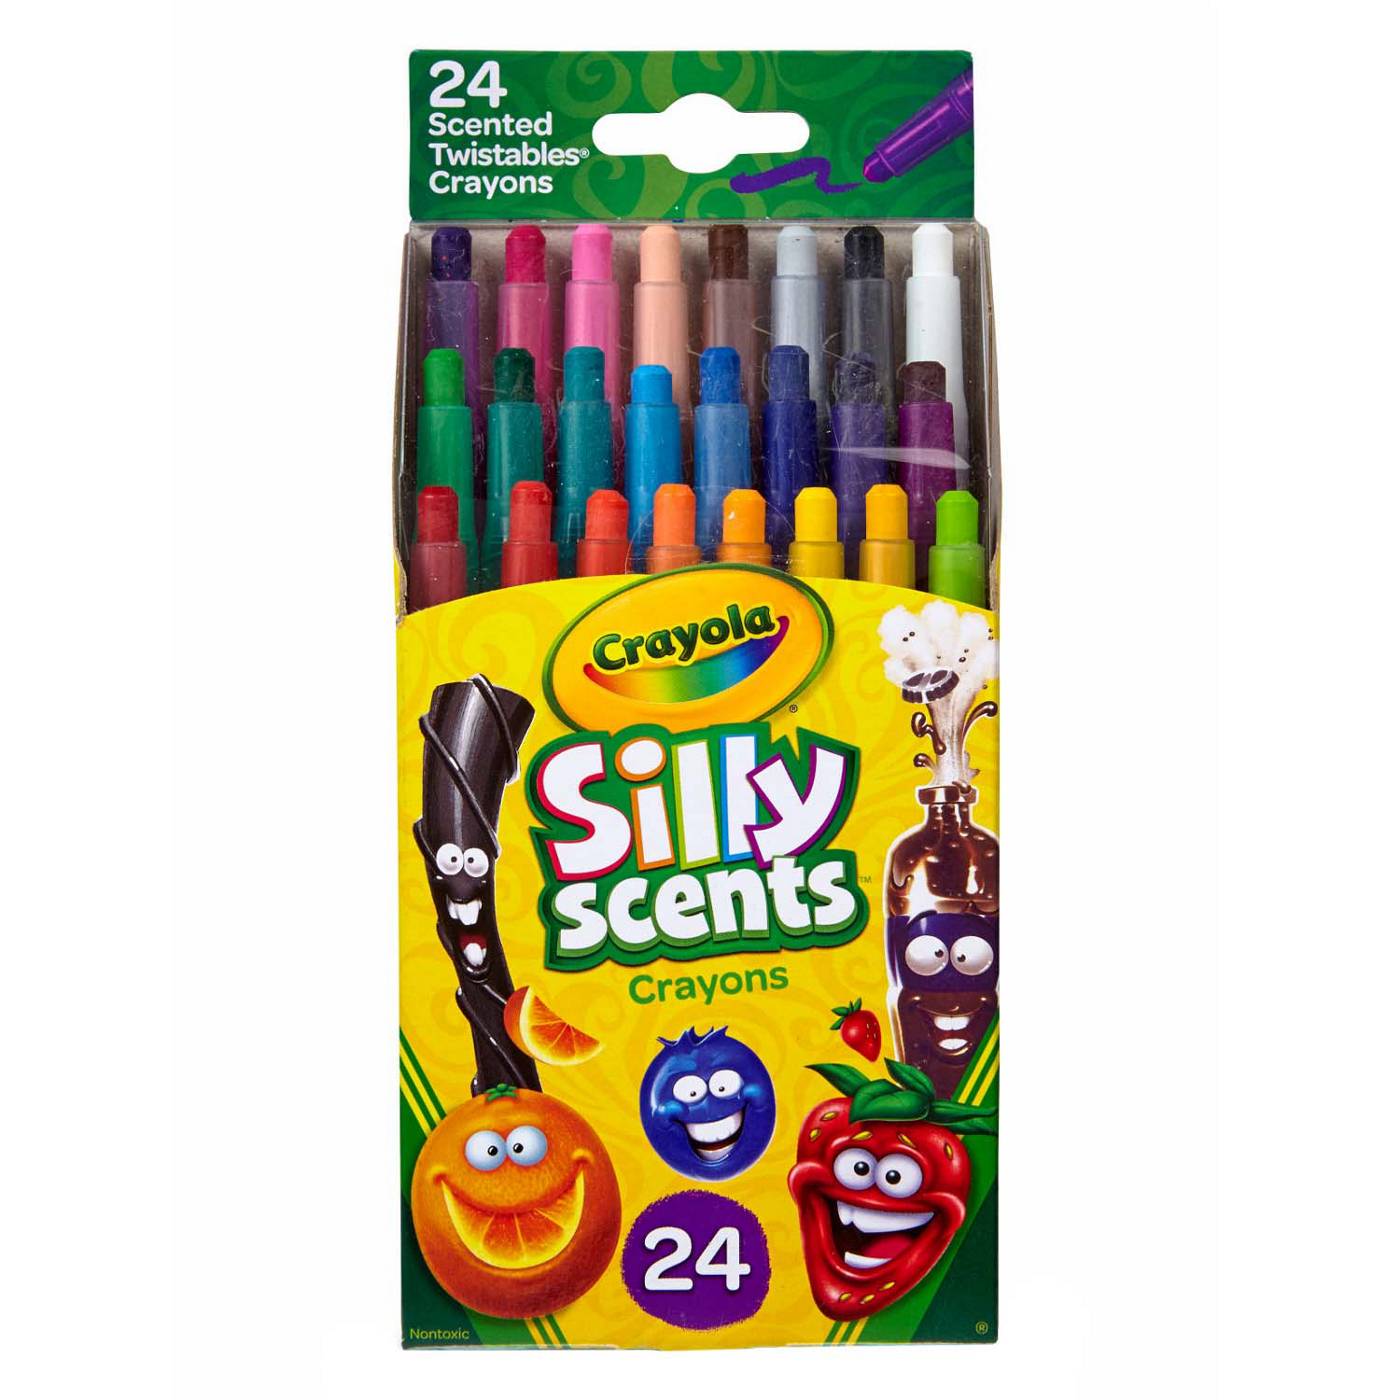 Silly Scents Twistables Crayons - Toy Box Michigan online Michigan